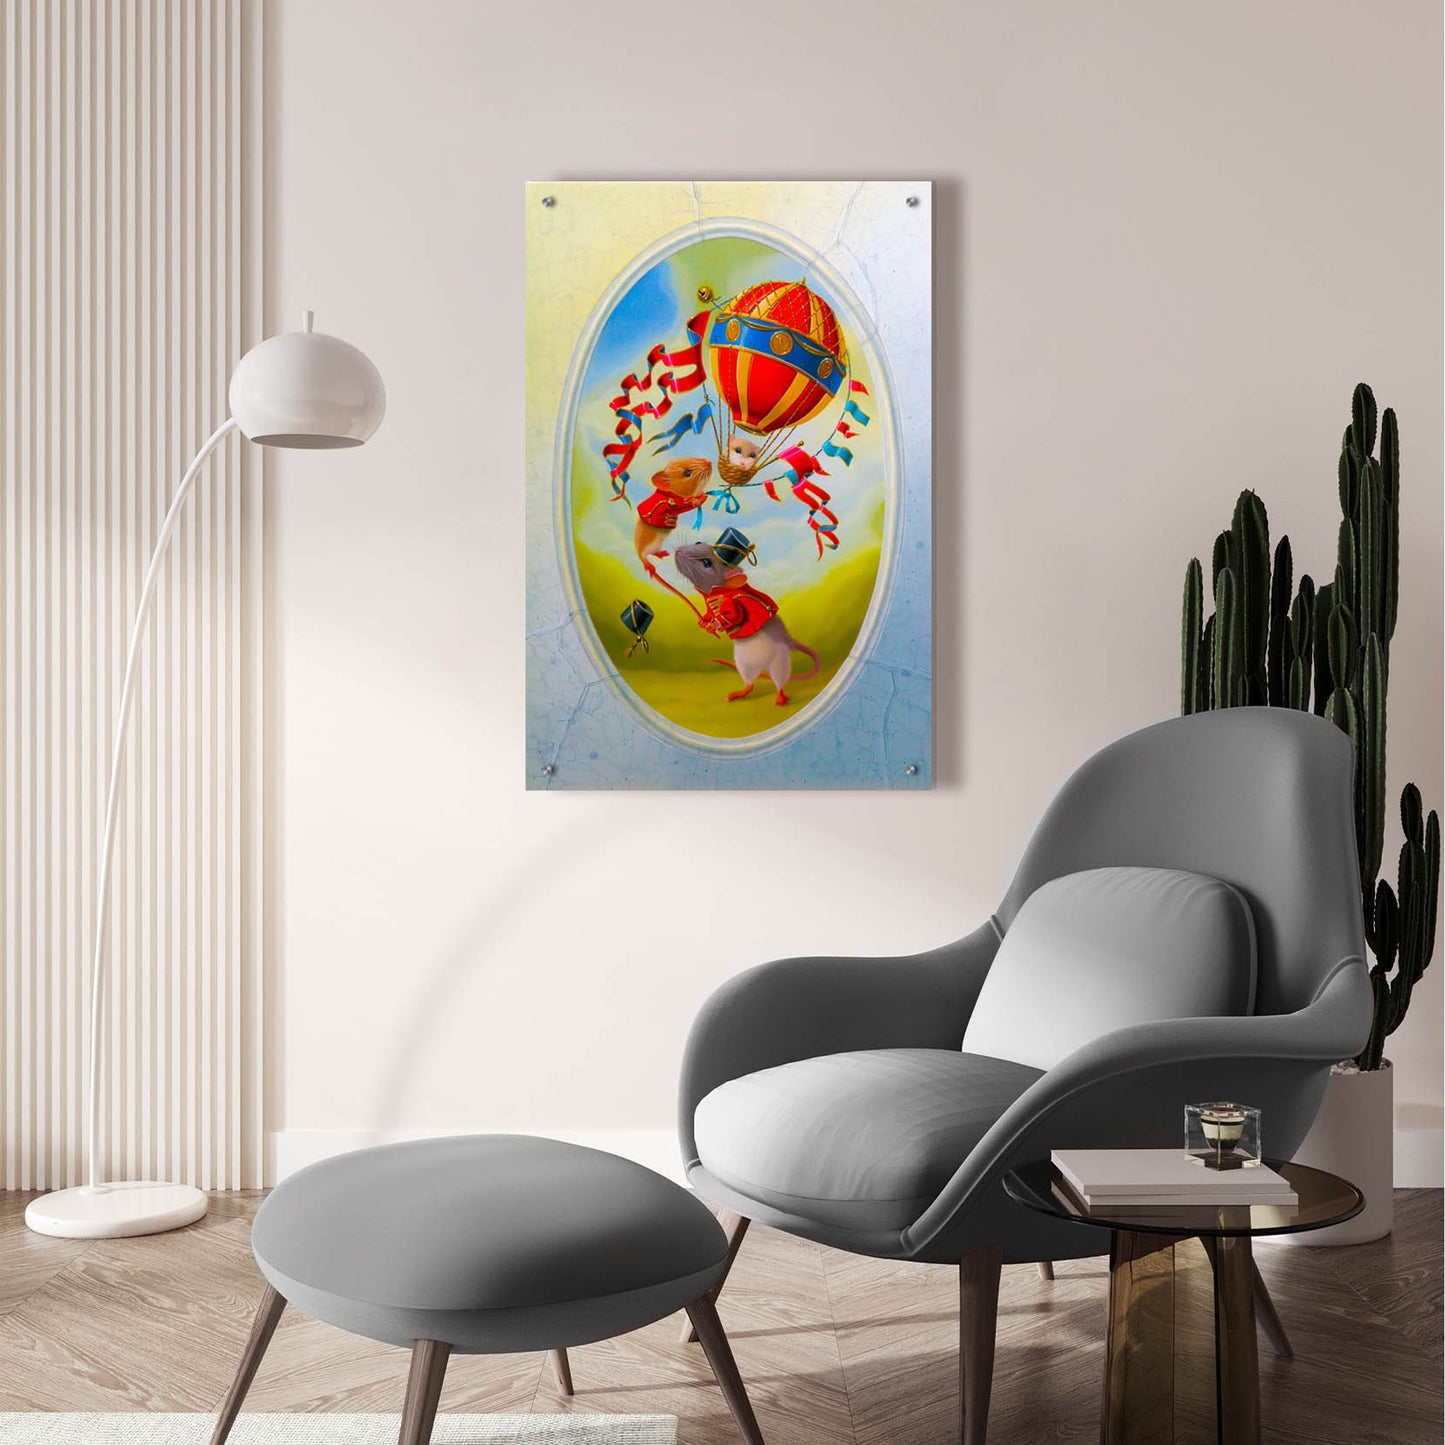 Epic Art 'Balloon Under Mistral' by Valery Vecu Quitard, Acrylic Glass Wall Art,24x36